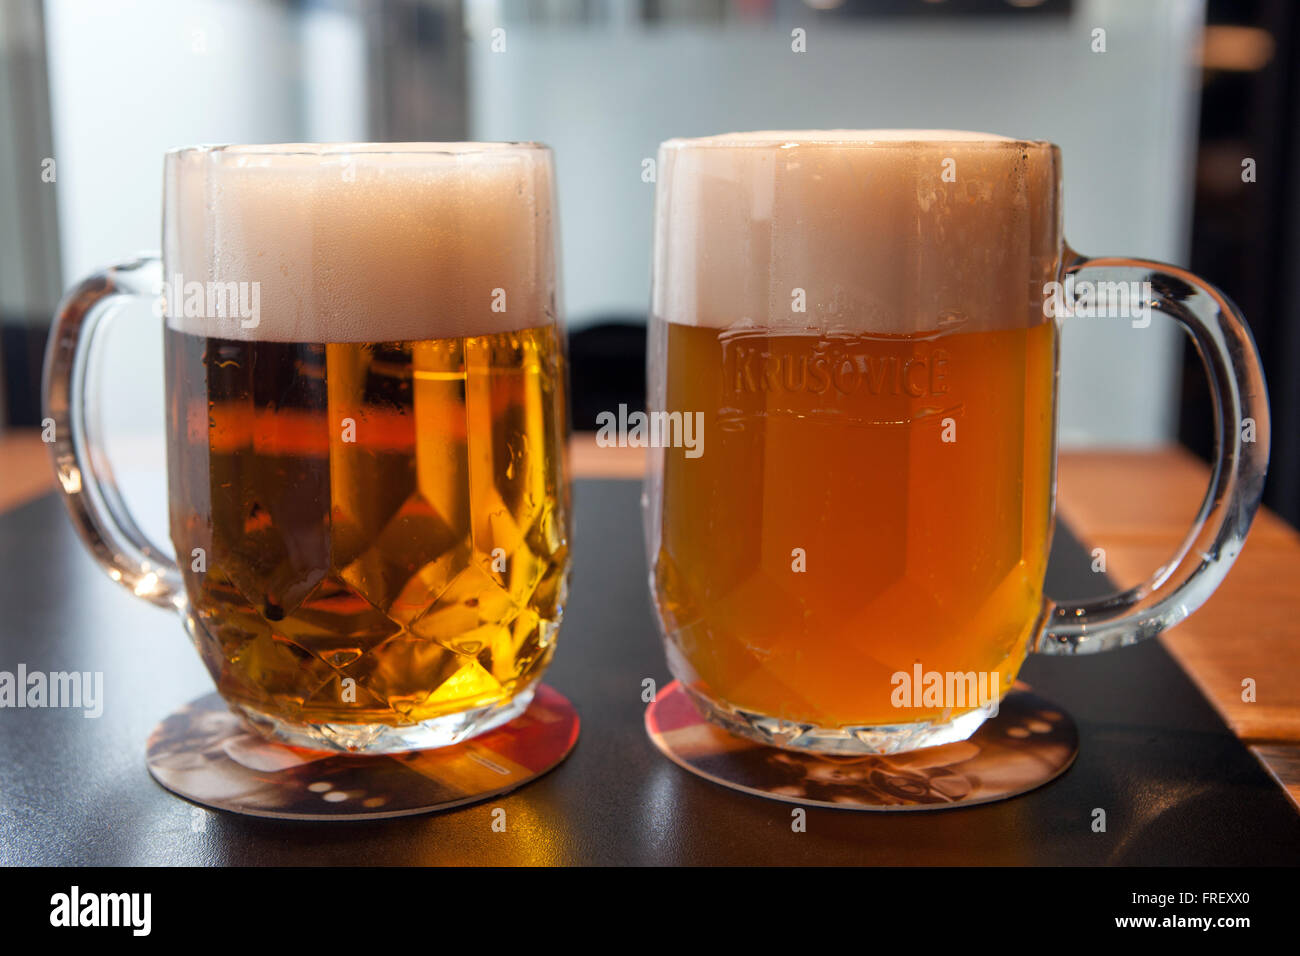 https://c8.alamy.com/comp/FREXX0/czech-beer-glass-two-pints-of-beer-with-different-types-of-light-beer-FREXX0.jpg